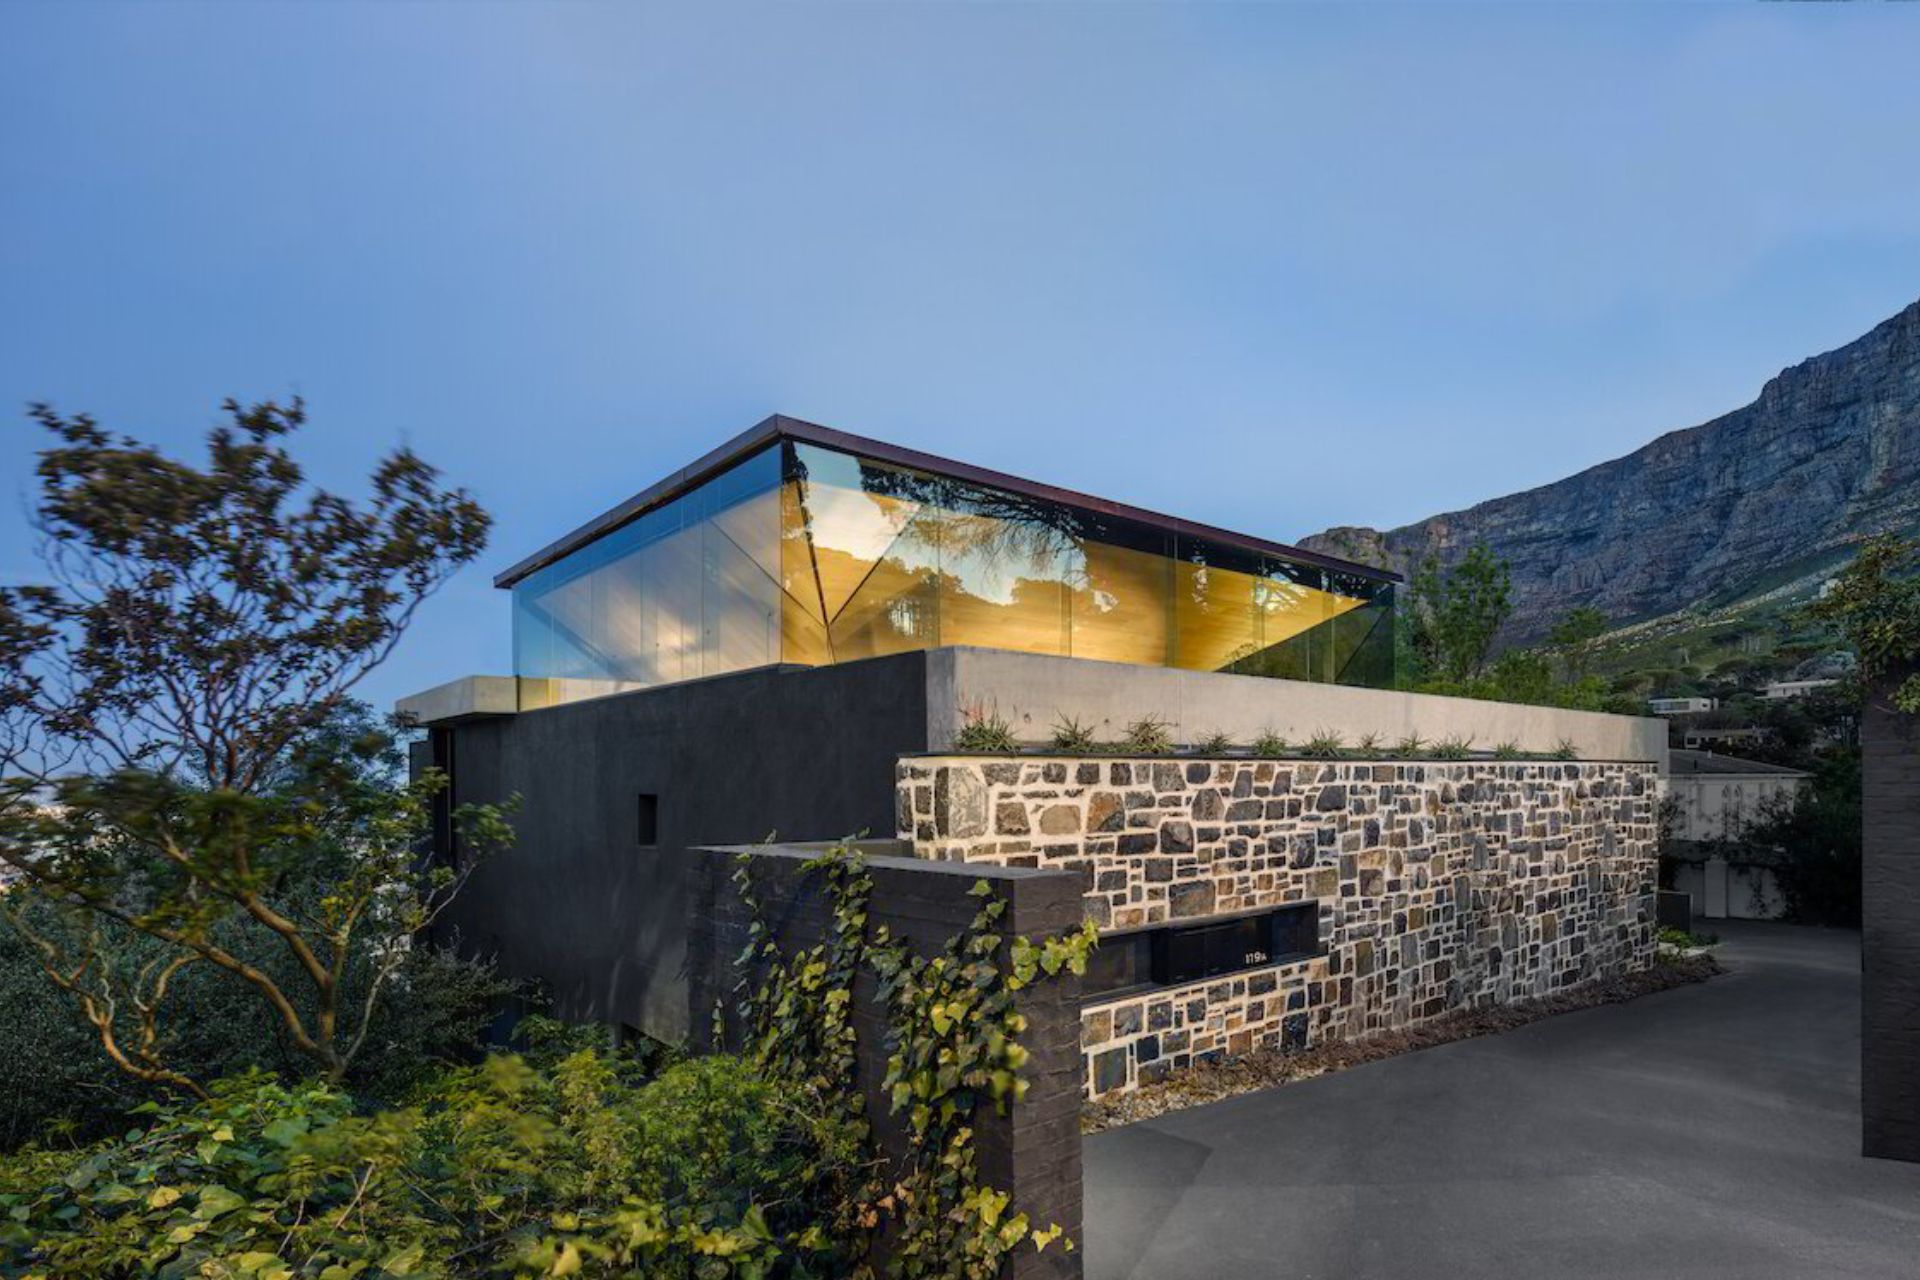 KLOOF HOUSE by SAOTA, an Architectural Framework on Cape Town and its Landscape 